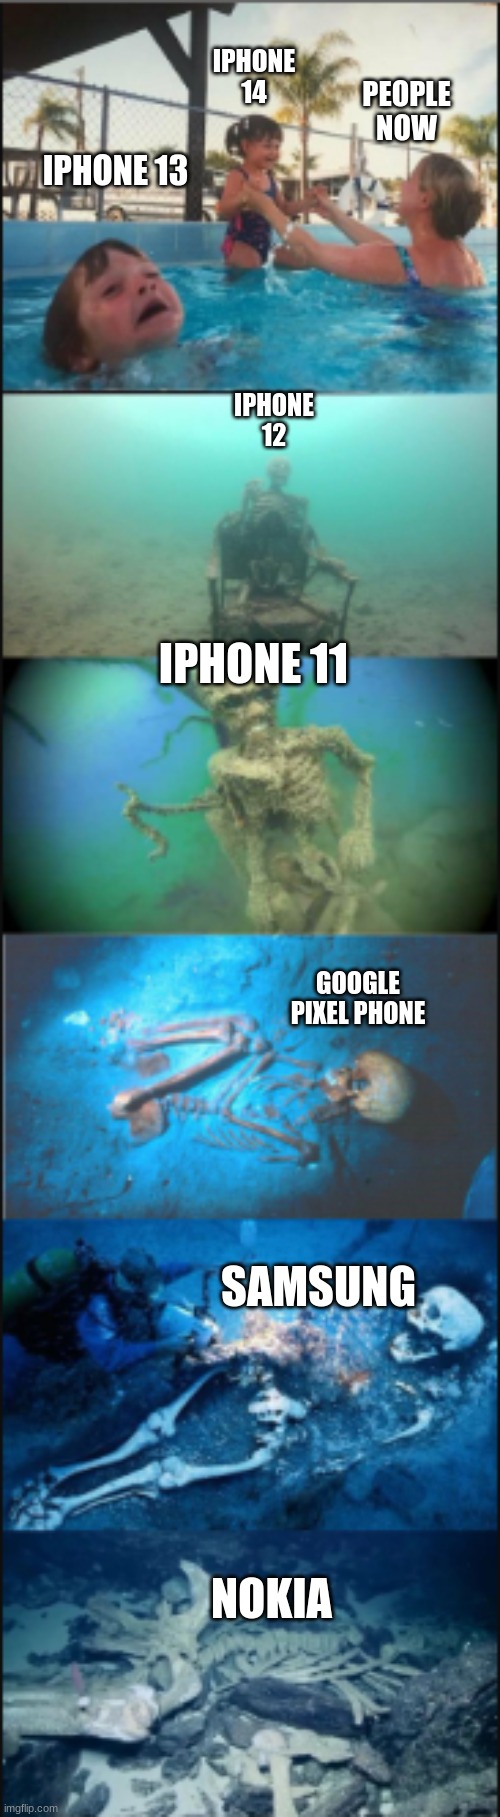 Phones now | IPHONE 14; PEOPLE NOW; IPHONE 13; IPHONE 12; IPHONE 11; GOOGLE PIXEL PHONE; SAMSUNG; NOKIA | image tagged in mother ignoring kid drowning in a pool | made w/ Imgflip meme maker